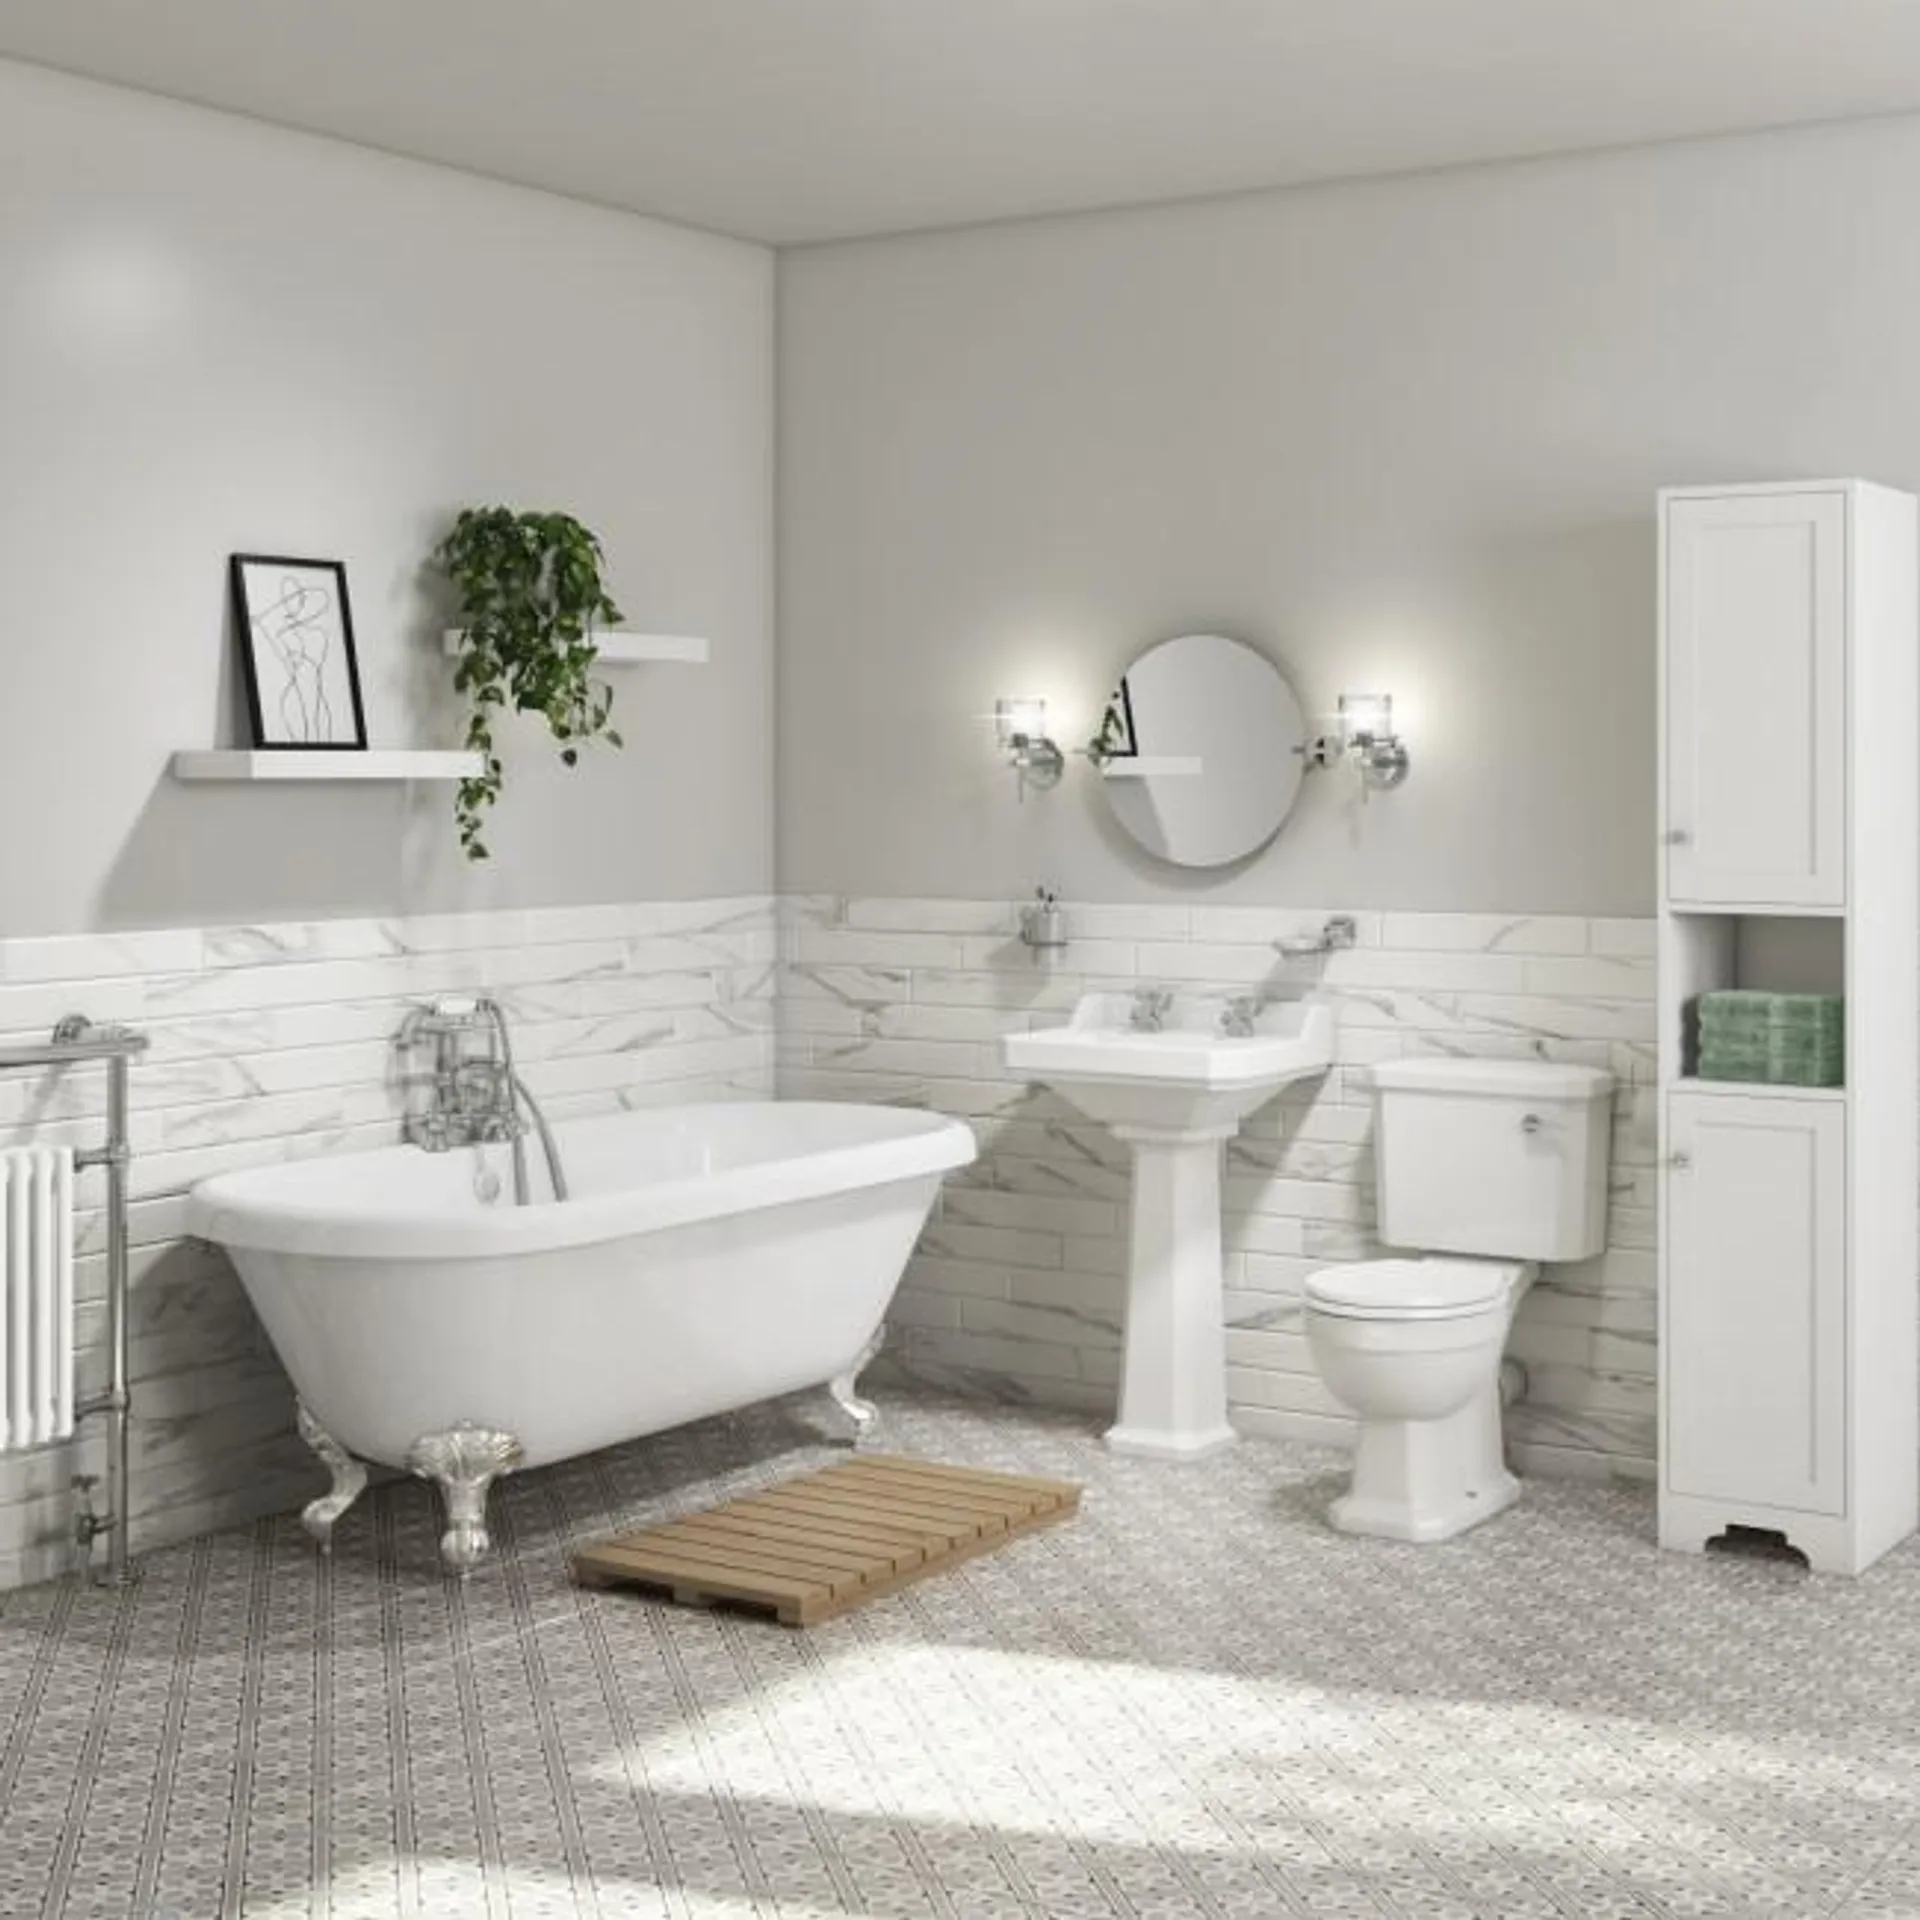 Park Royal Double Ended Freestanding Bath Suite with Toilet & Basin